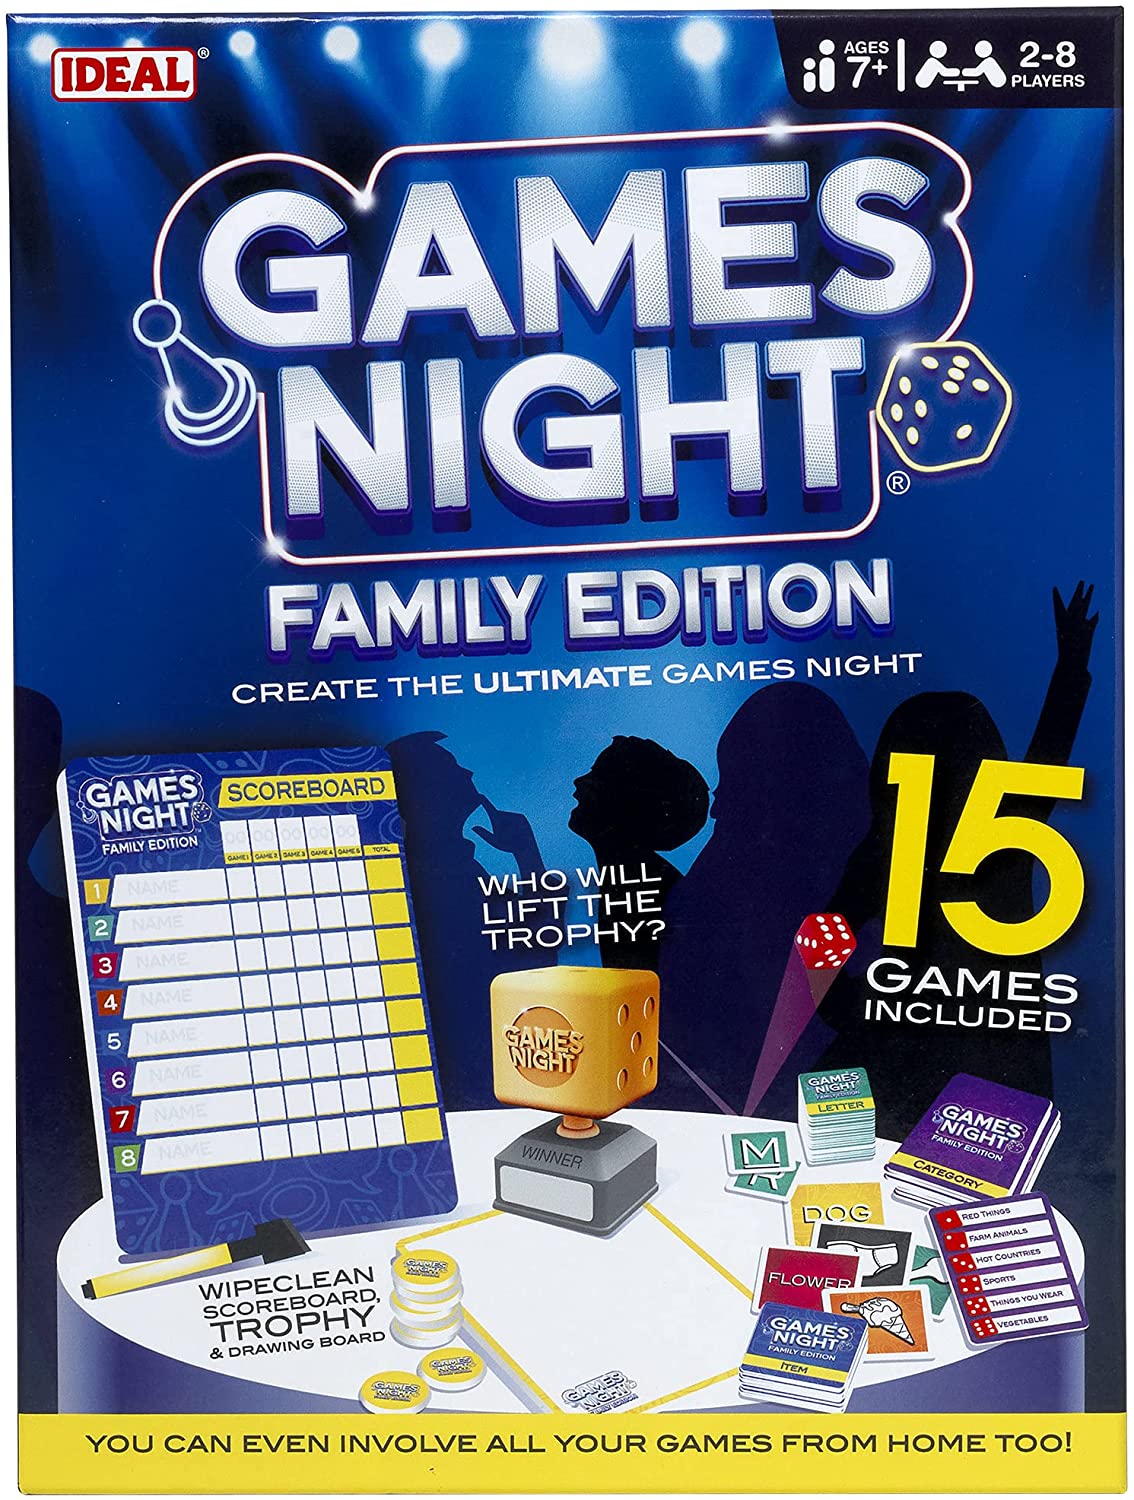 Ideal Games Night - Family Edition